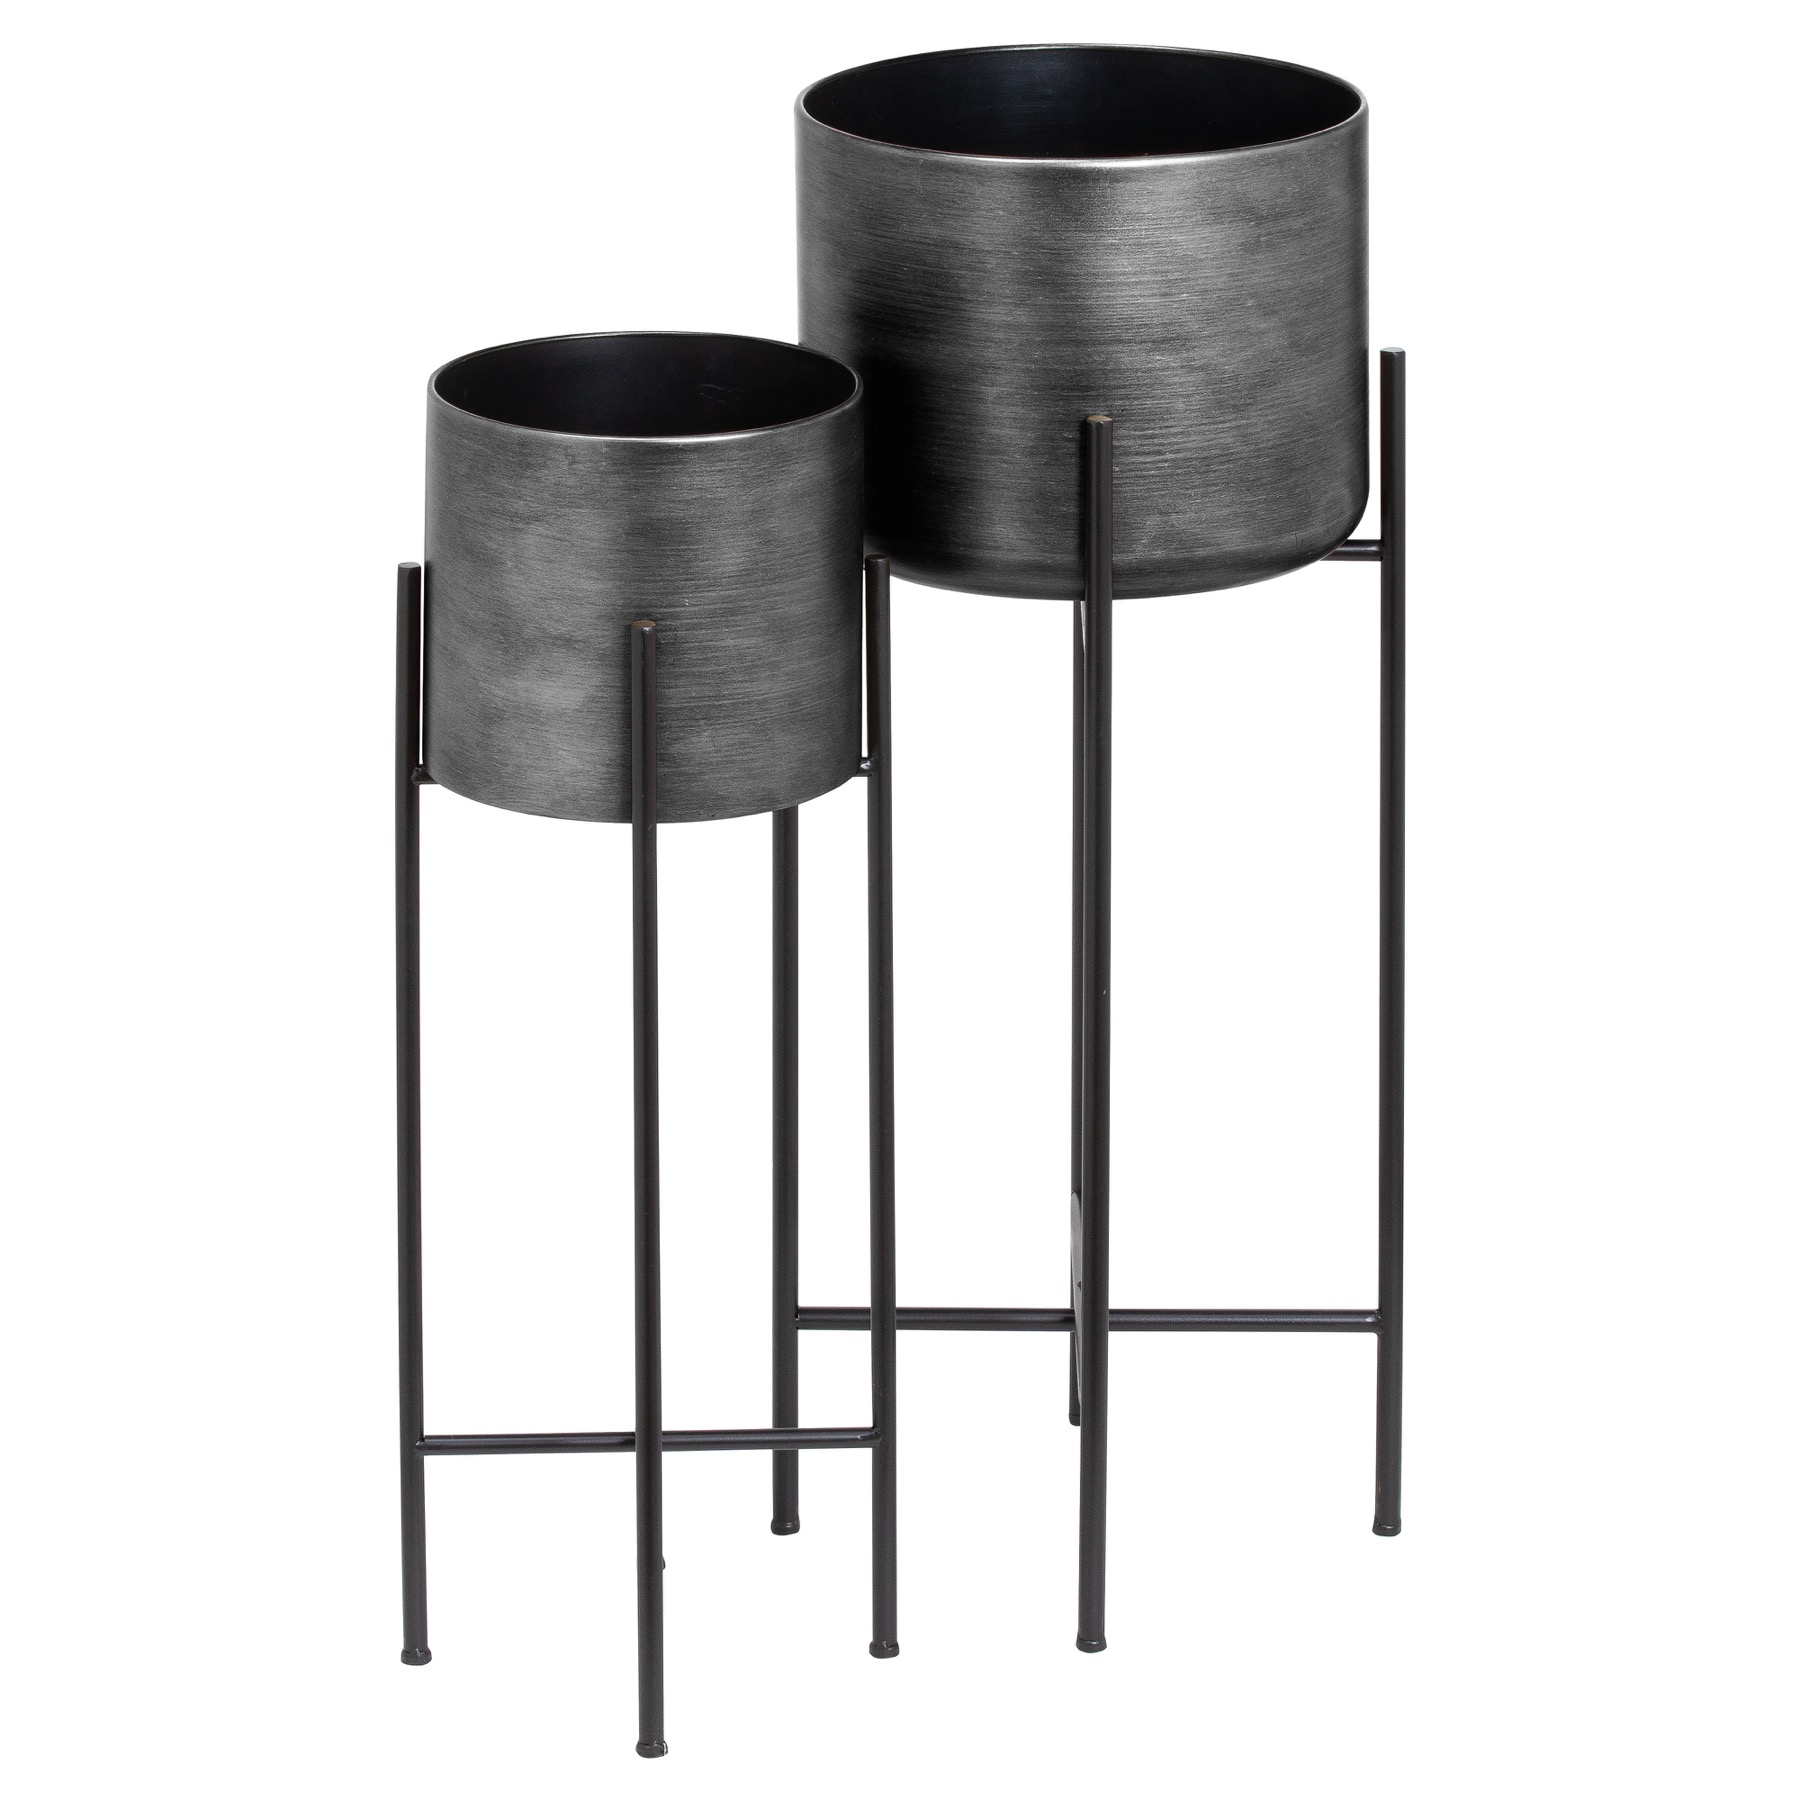 Set Of Two Grey Metallic Planters On Stand - Image 1